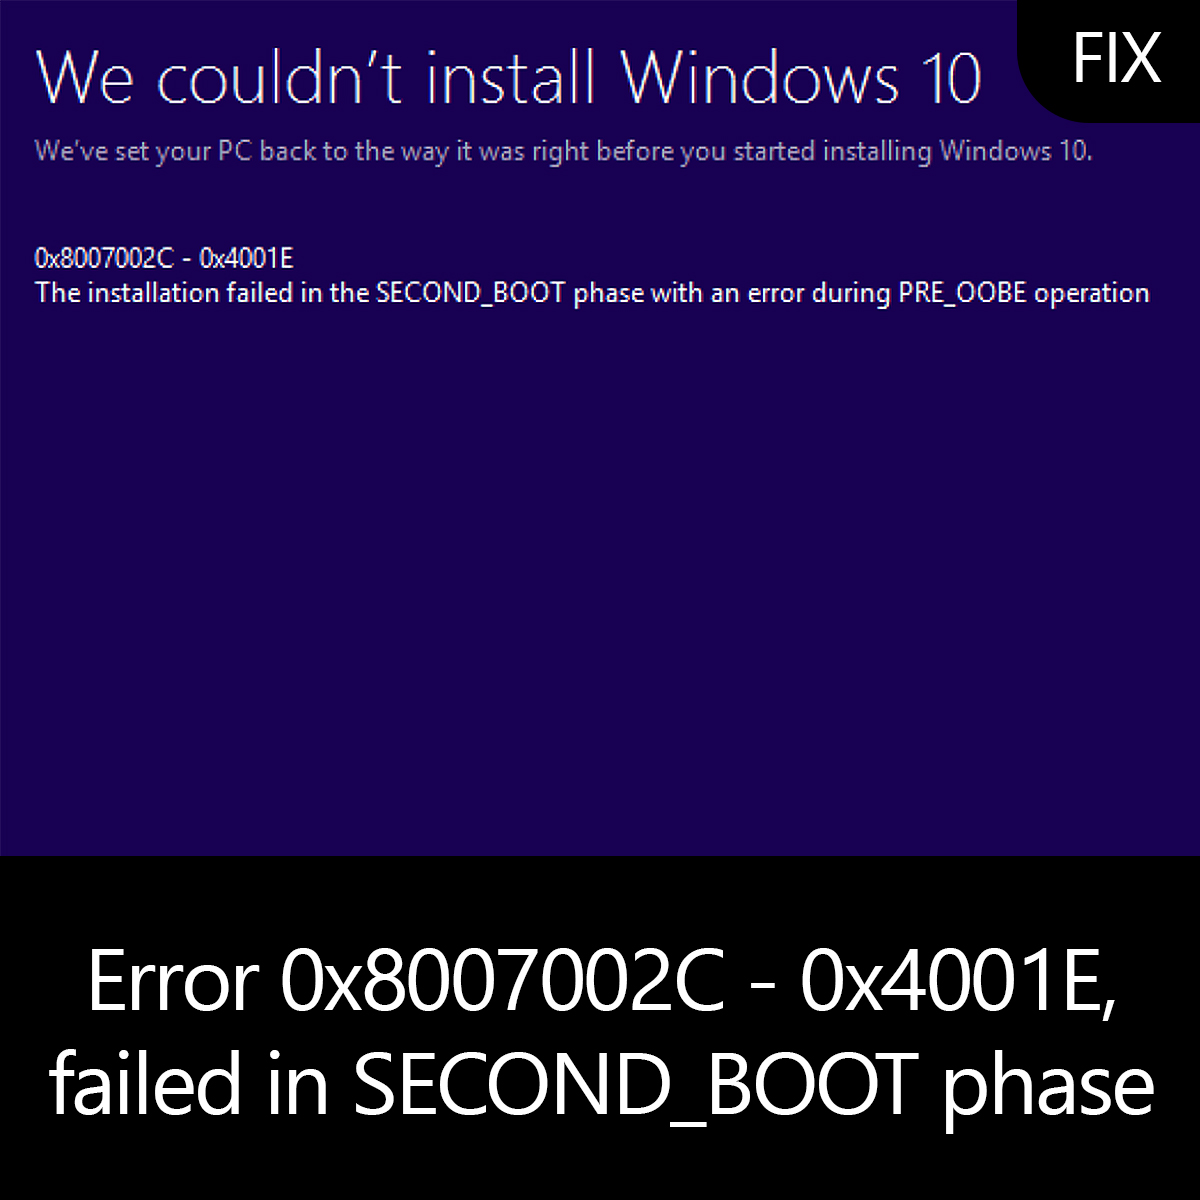 the installation failed in the second boot phase